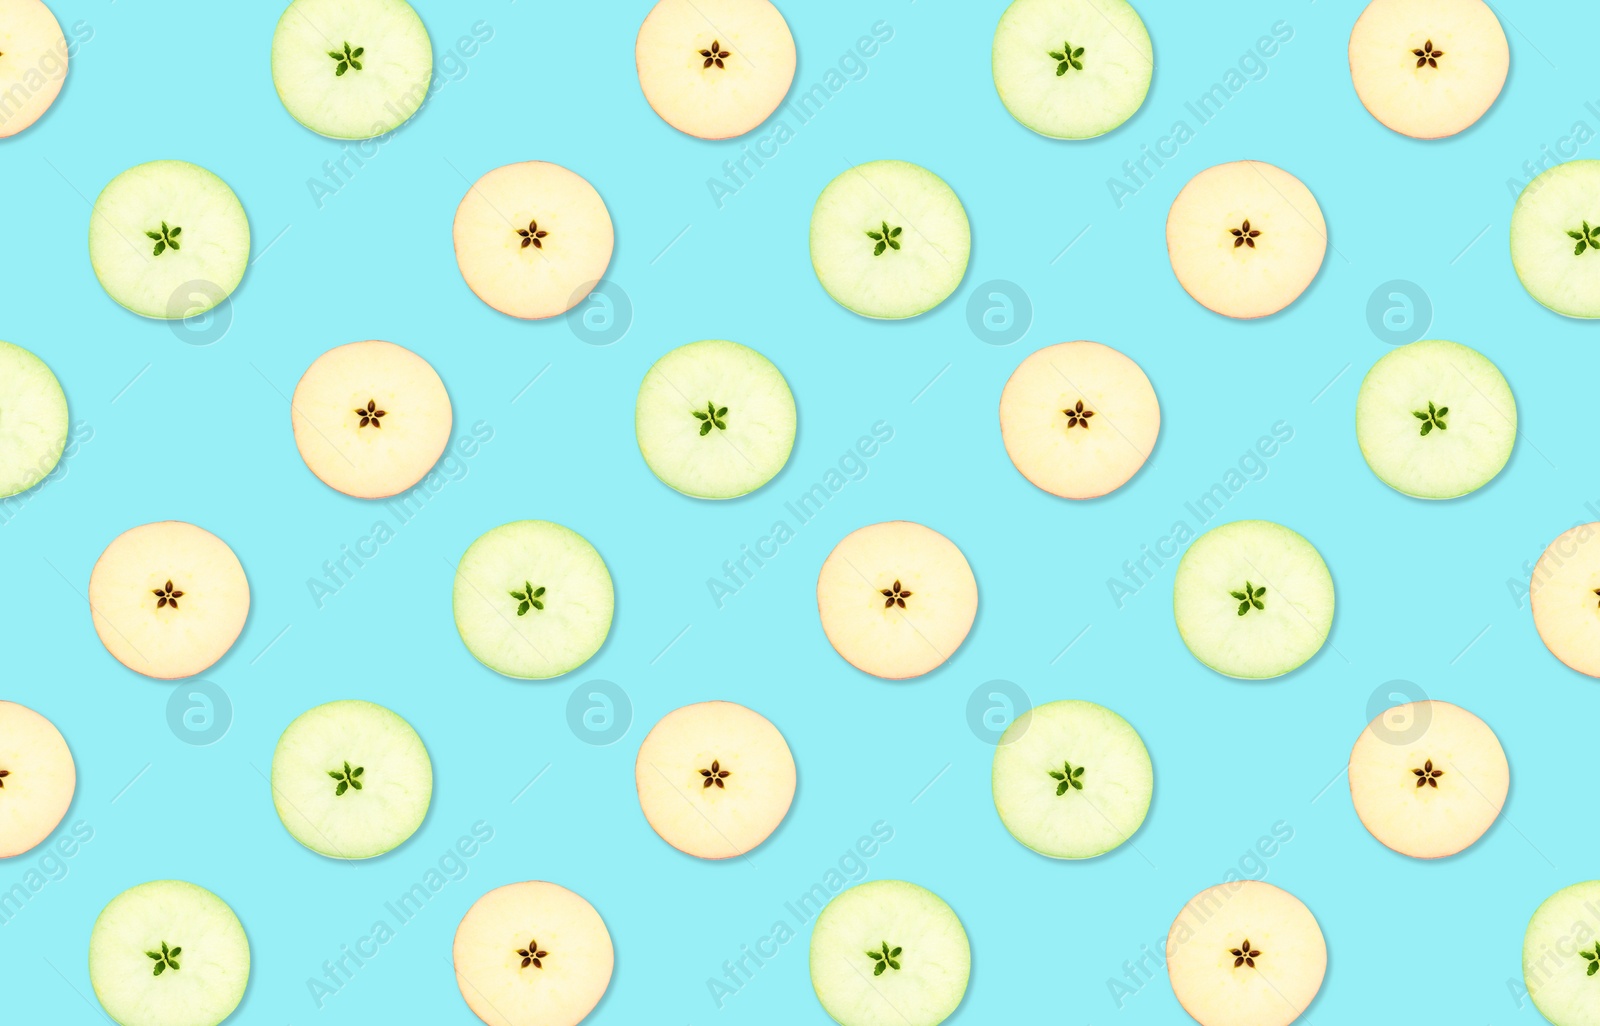 Image of Pattern of red and green apple slices on light blue background